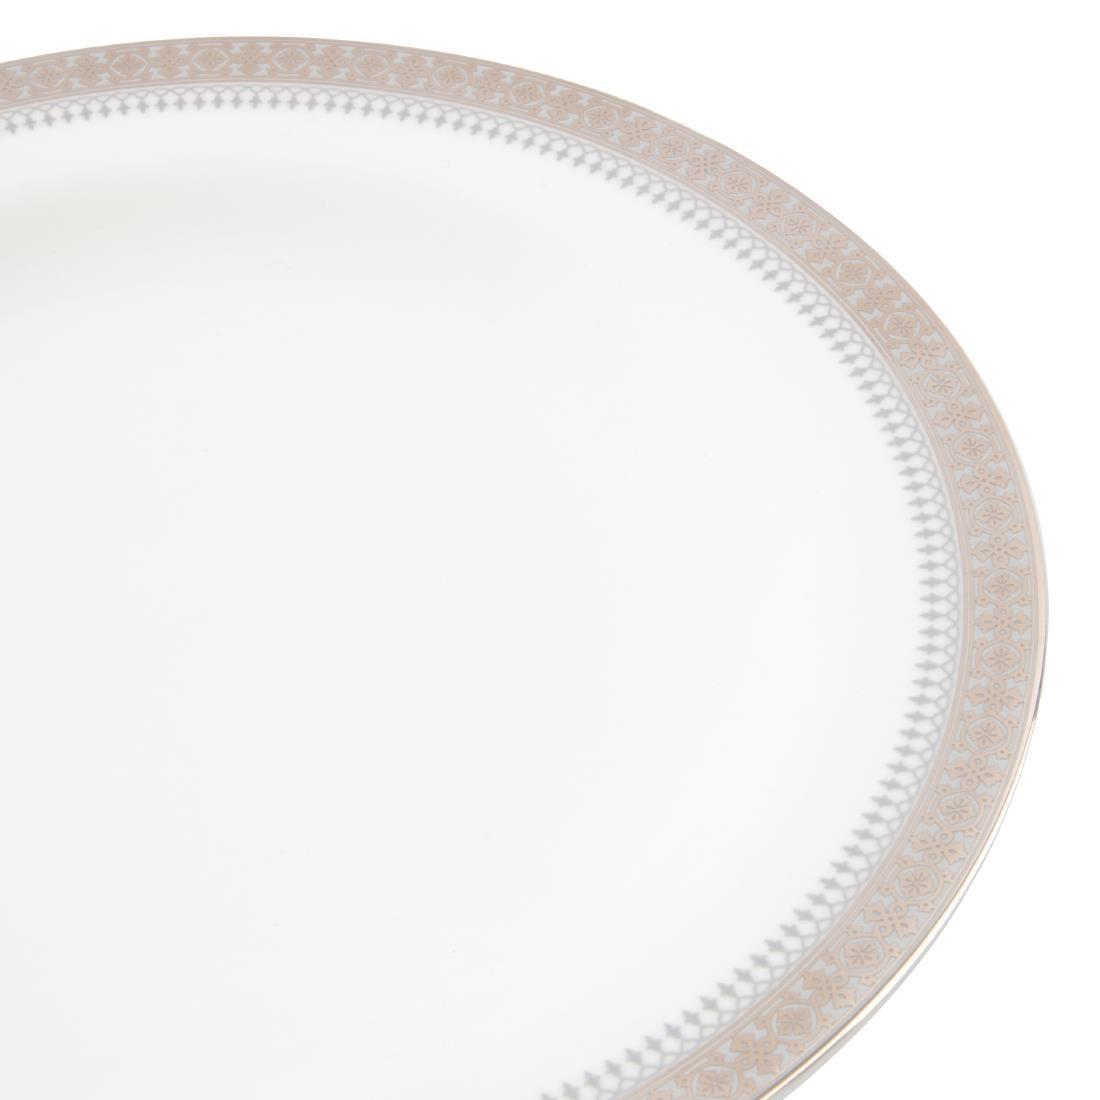 Royal Bone Afternoon Tea Couronne Plate 210mm (Pack of 12) - FB740  - 2